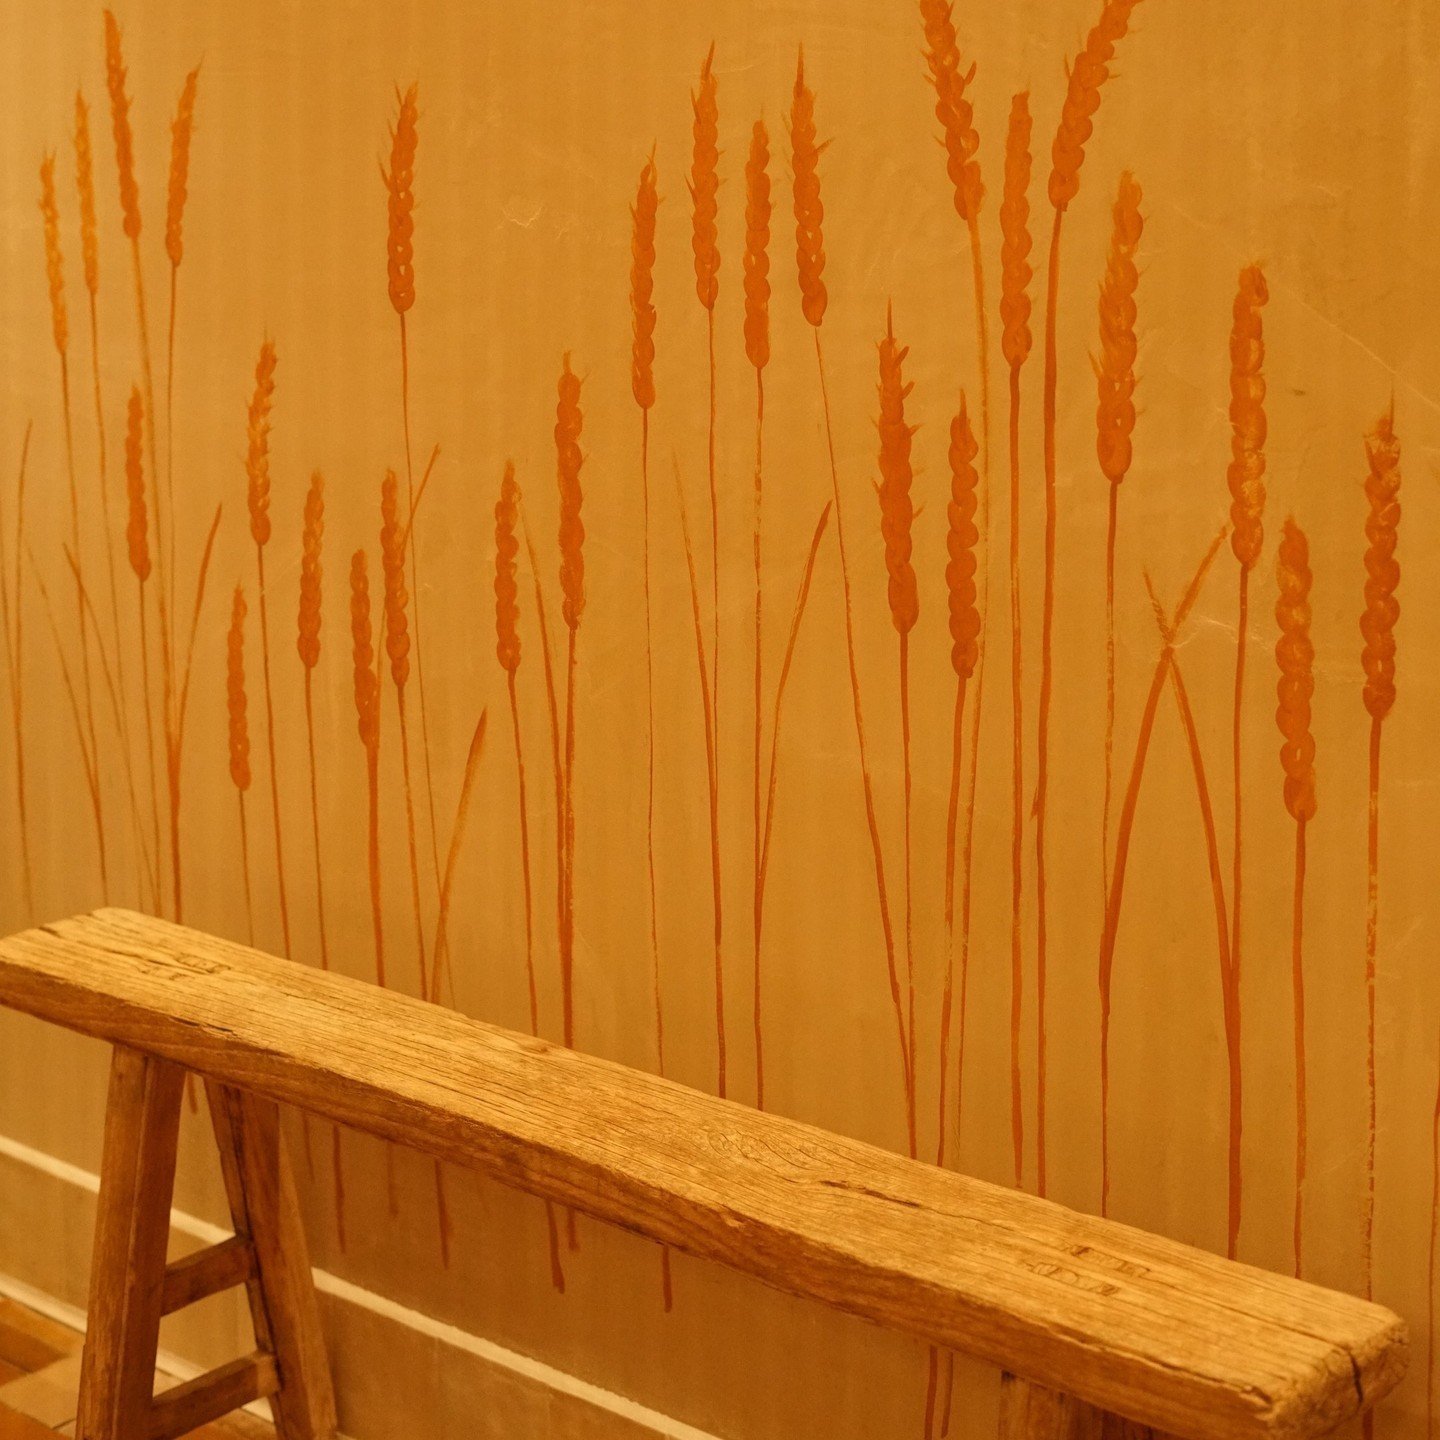 FUN FACT: Our very own Mr. DLB added a personal touch to Bravo Farms' new downtown Visalia location by painting the wheat accents on the walls! Also, we added some brands of our dear family friends. Making our mark in subtle, creative ways is always 